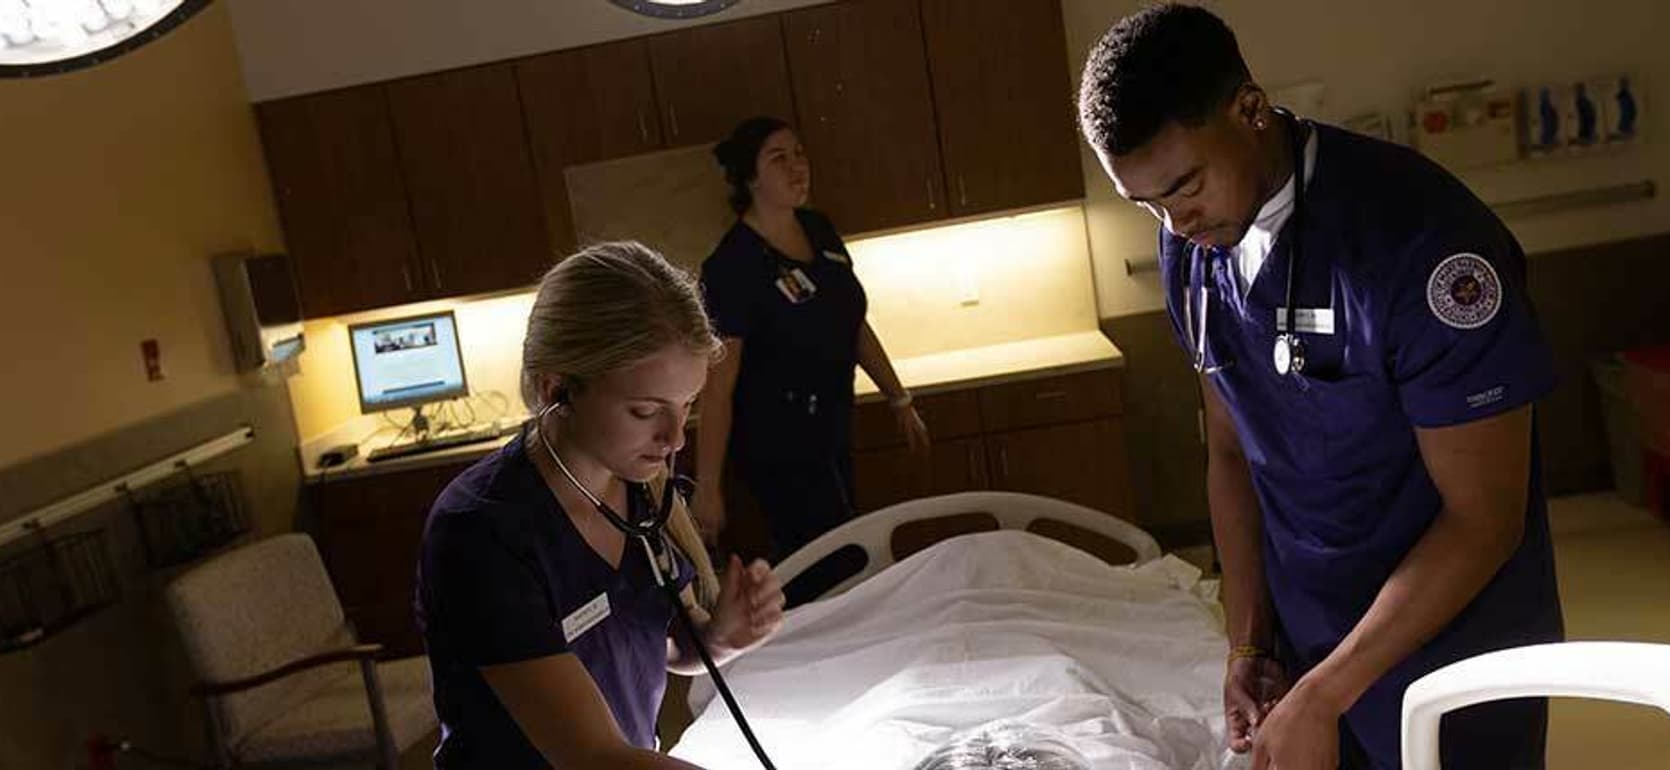 Bachelor of Science in Nursing | BSN students working on patient in nursing training room.